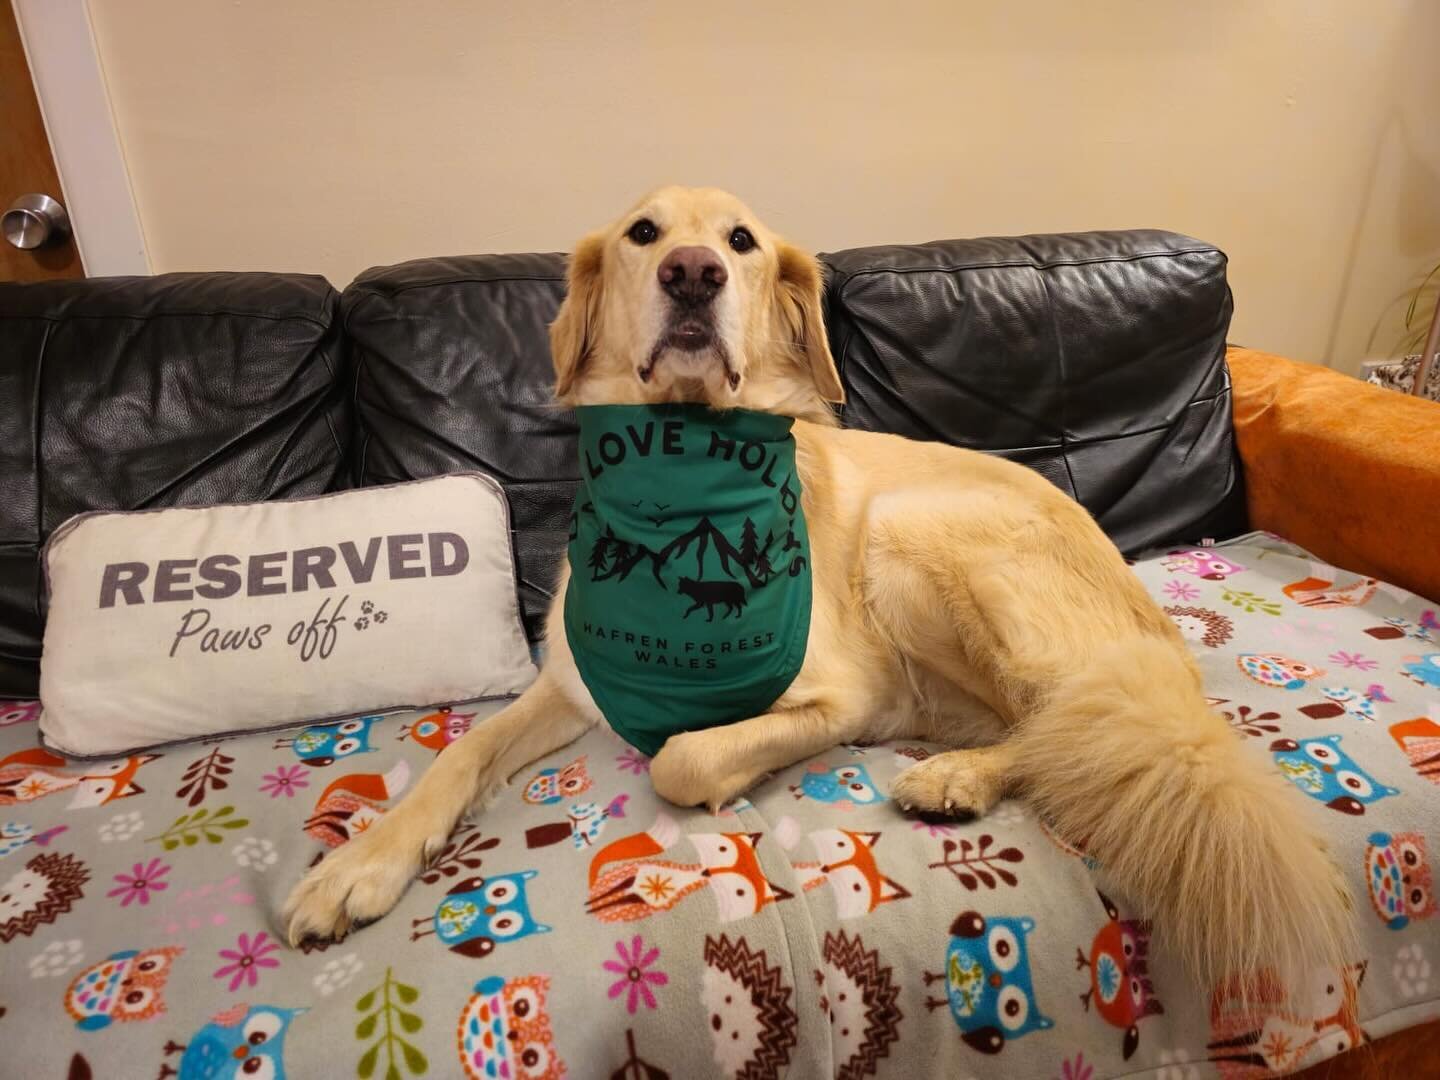 The gorgeous Marley modelling our Dogs Love Holidays bandana. ❤️ 100% of the profits from the sale of our merchandise are being donated to @saveourseizeddogs 
To order go to our shop on our website site - Link in bio. 

#dogsloveholidays #reactivedog